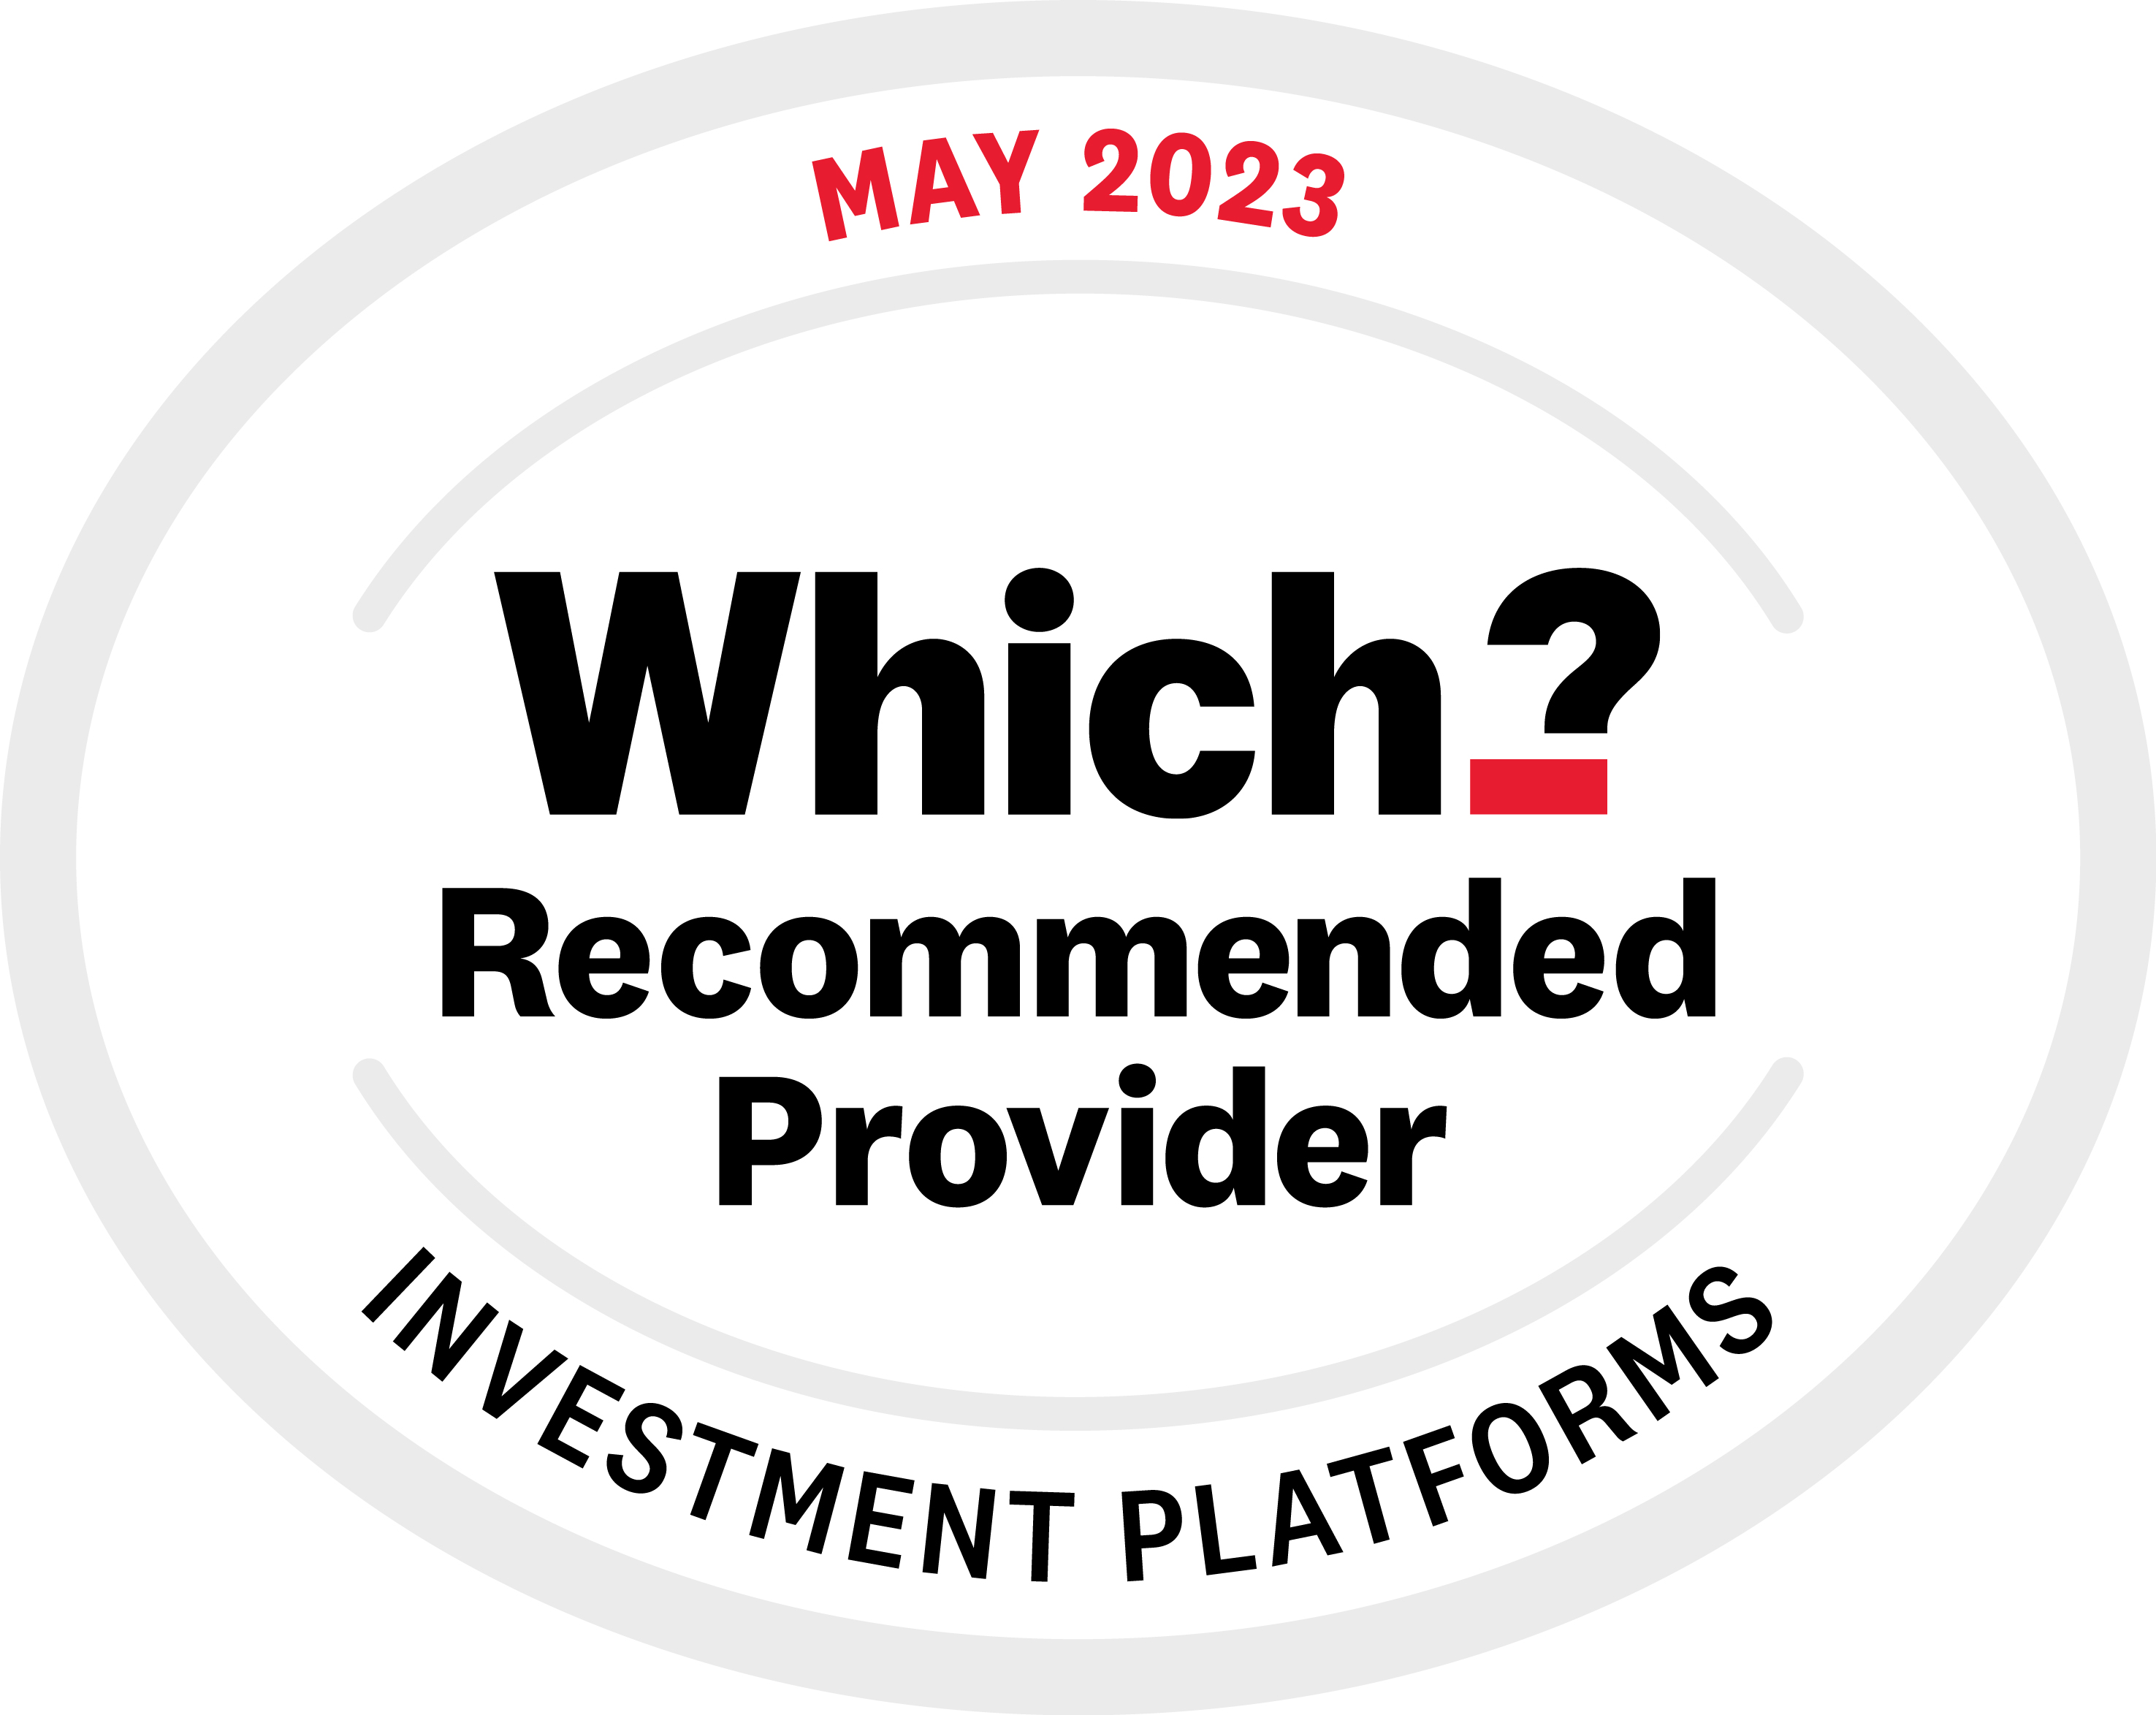 AJ Bell Which? recommended provider investment platform may 2023